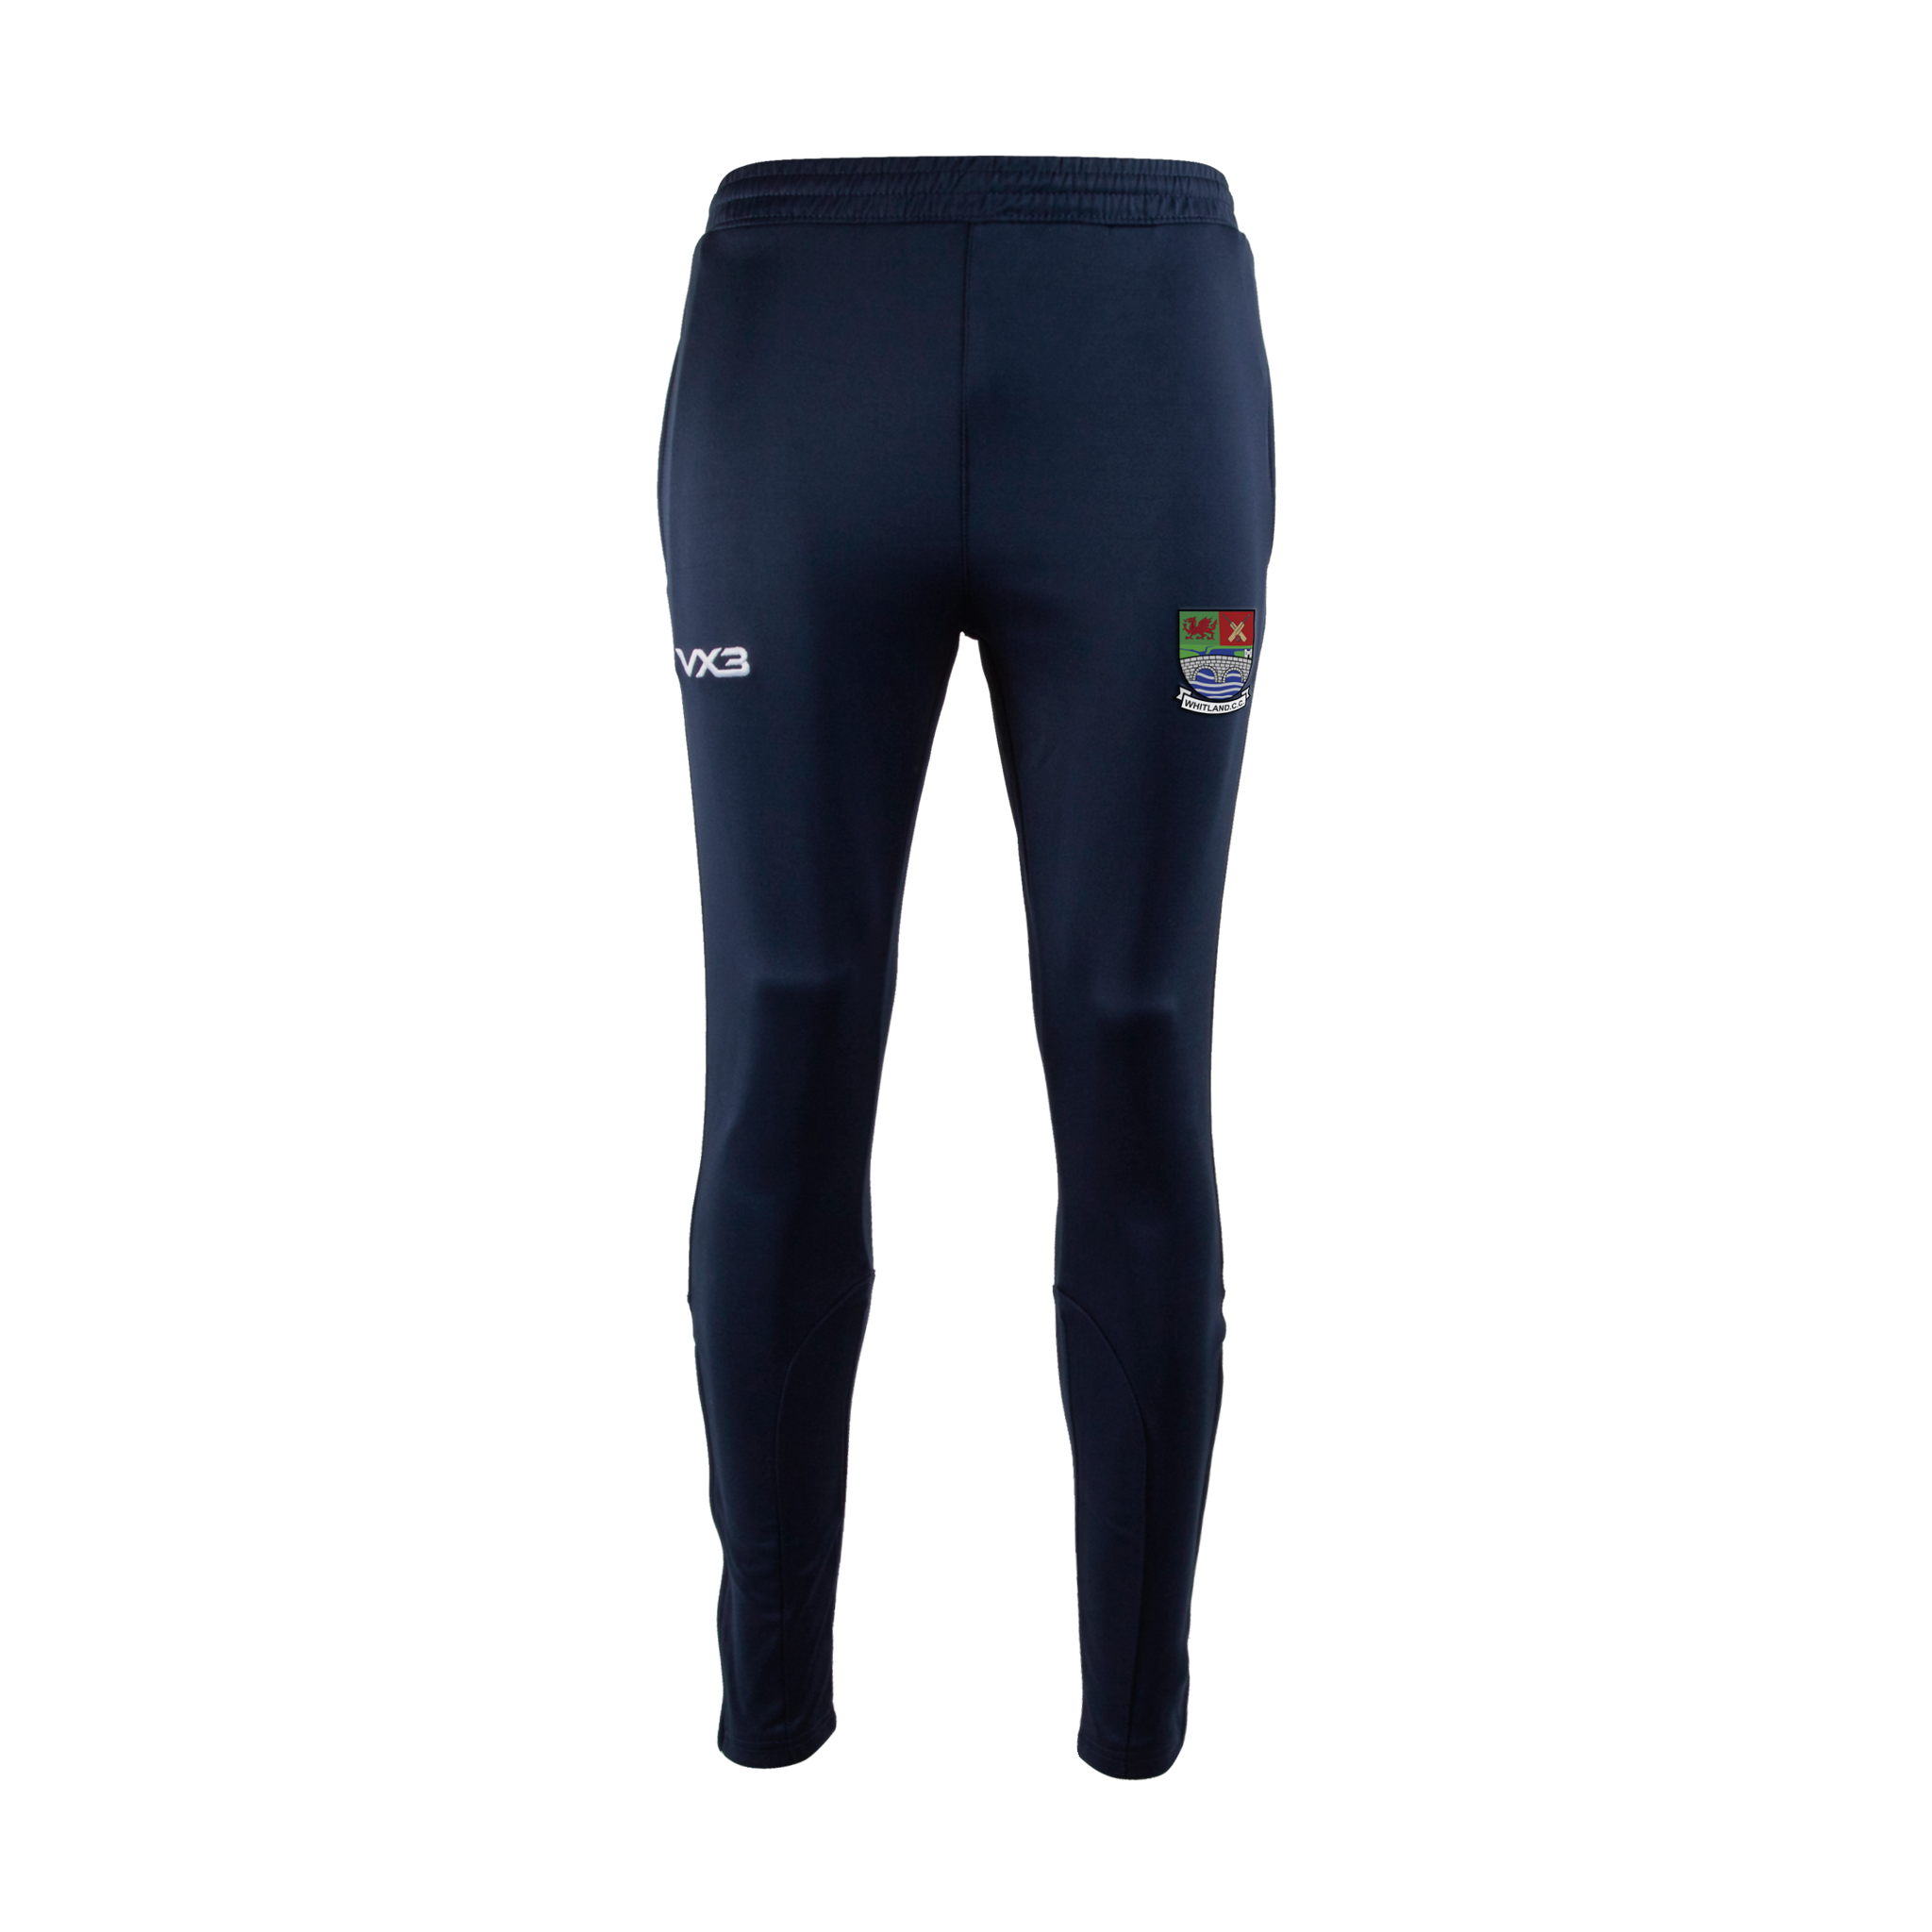 Whitland Cricket Club Primus Youth Skinny Pants